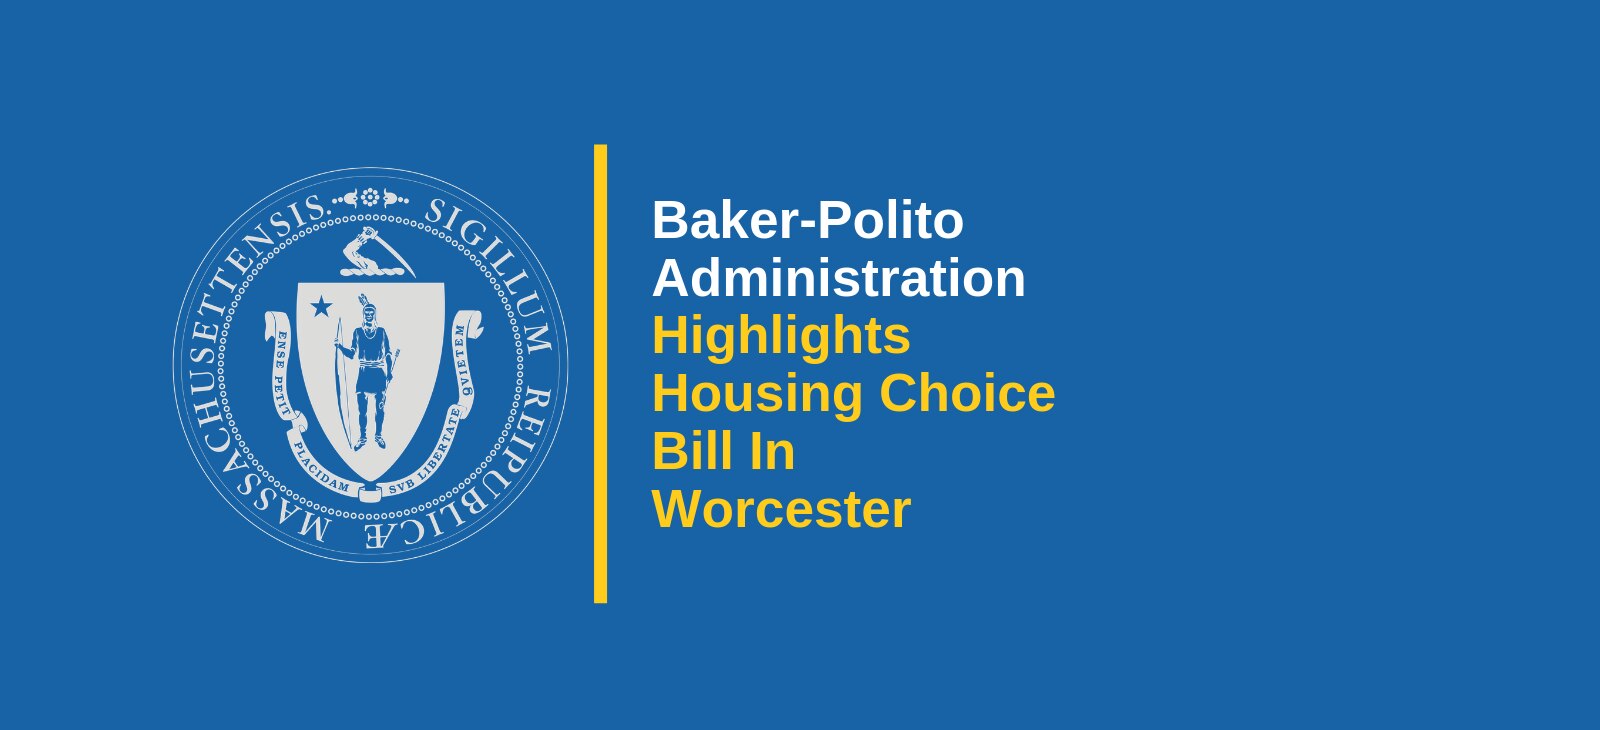 Baker-Polito Administration Highlights Housing Choice Bill in Worcester